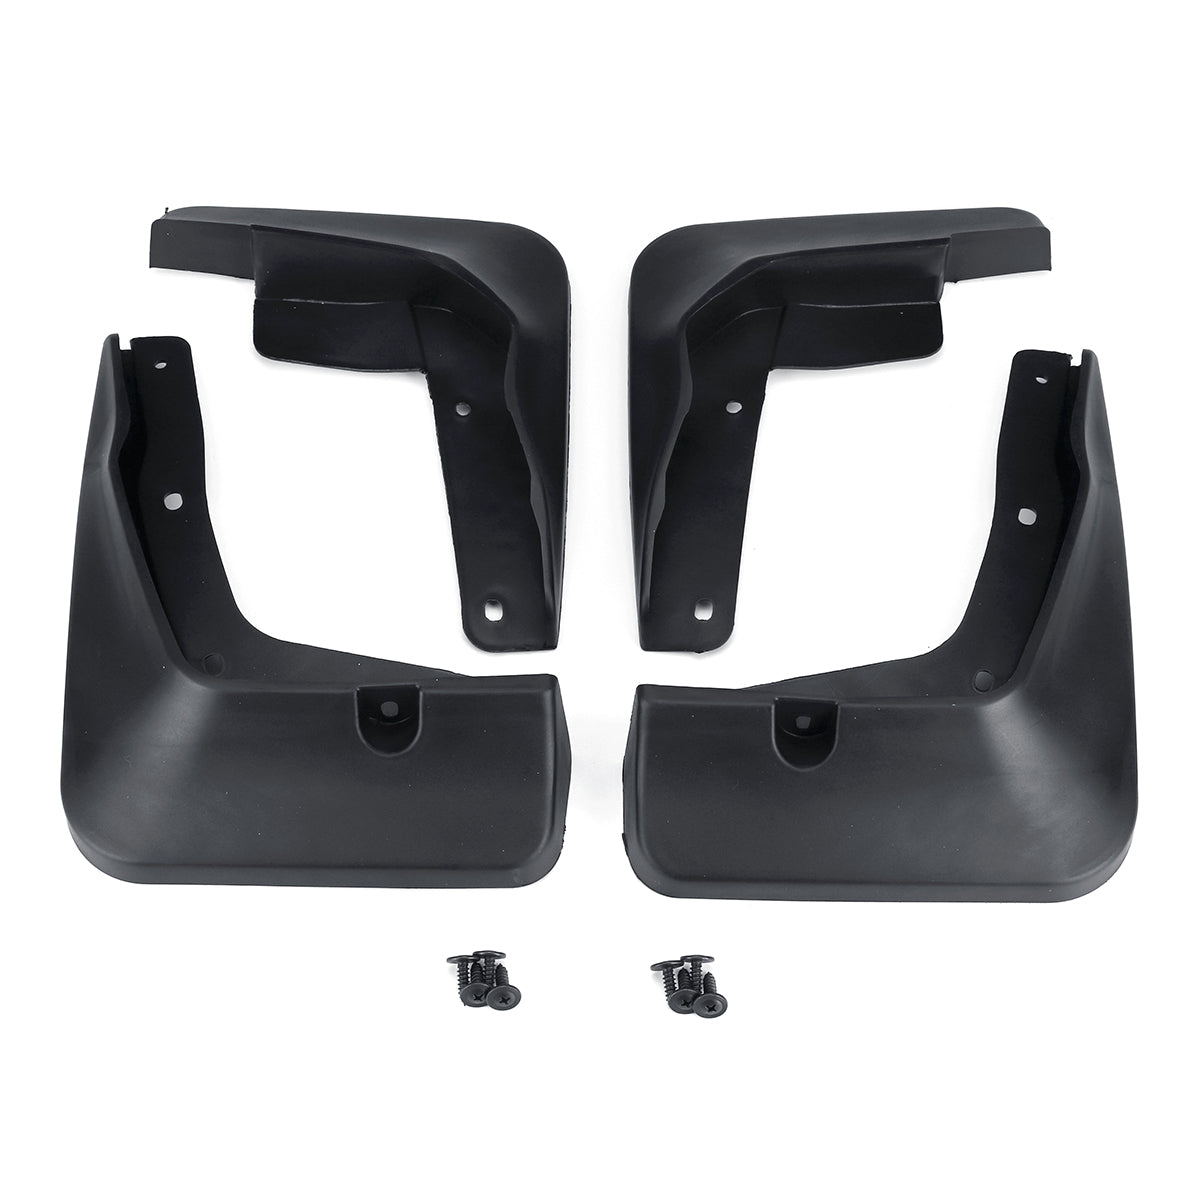 Oshotto Mud Flap (O.E.M Type) For Ford Ecosports (Set of 4)